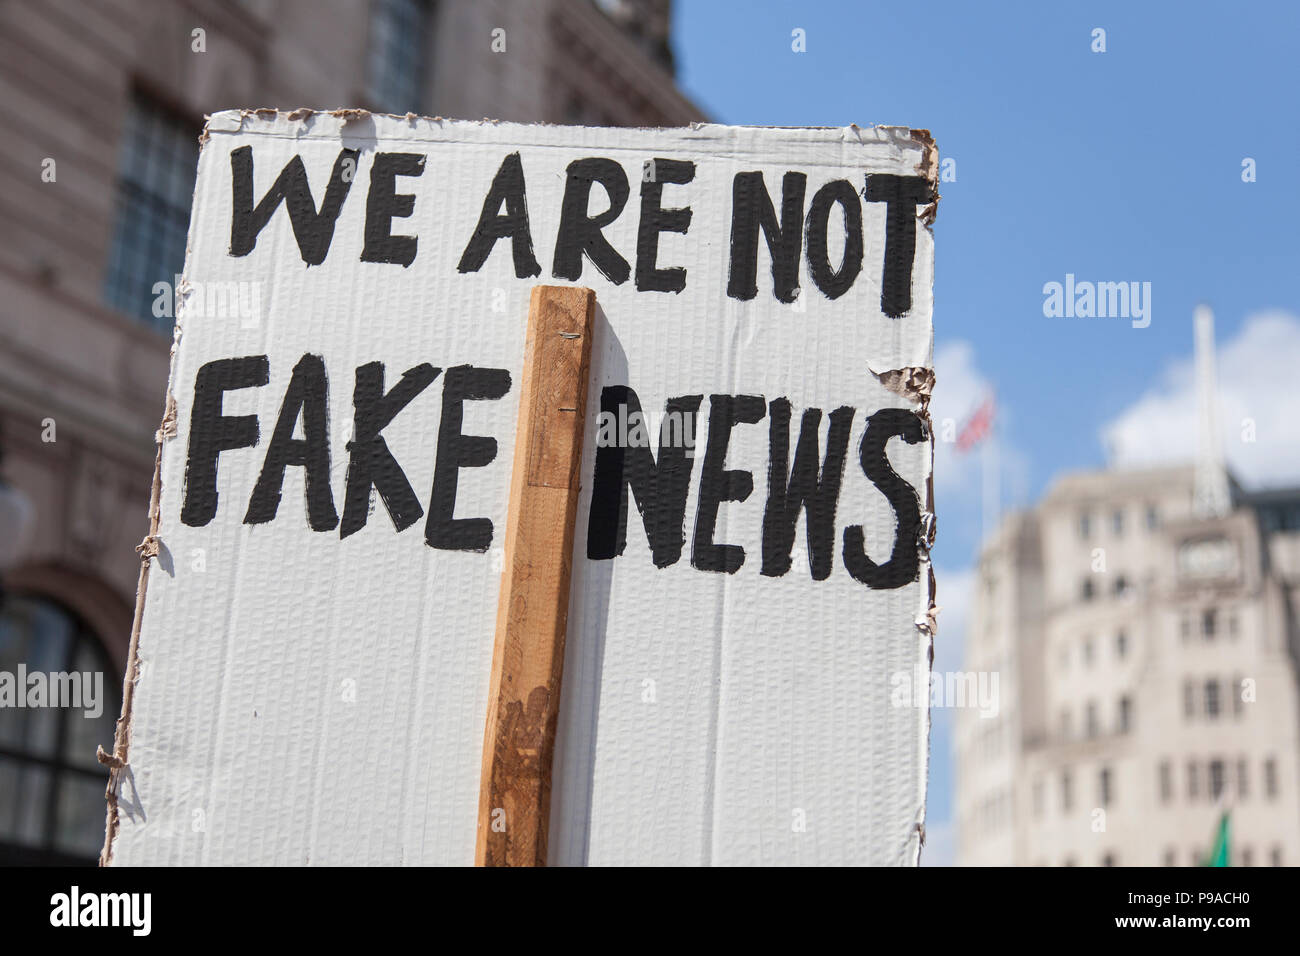 We are not fake news political banner at a protest march Stock Photo